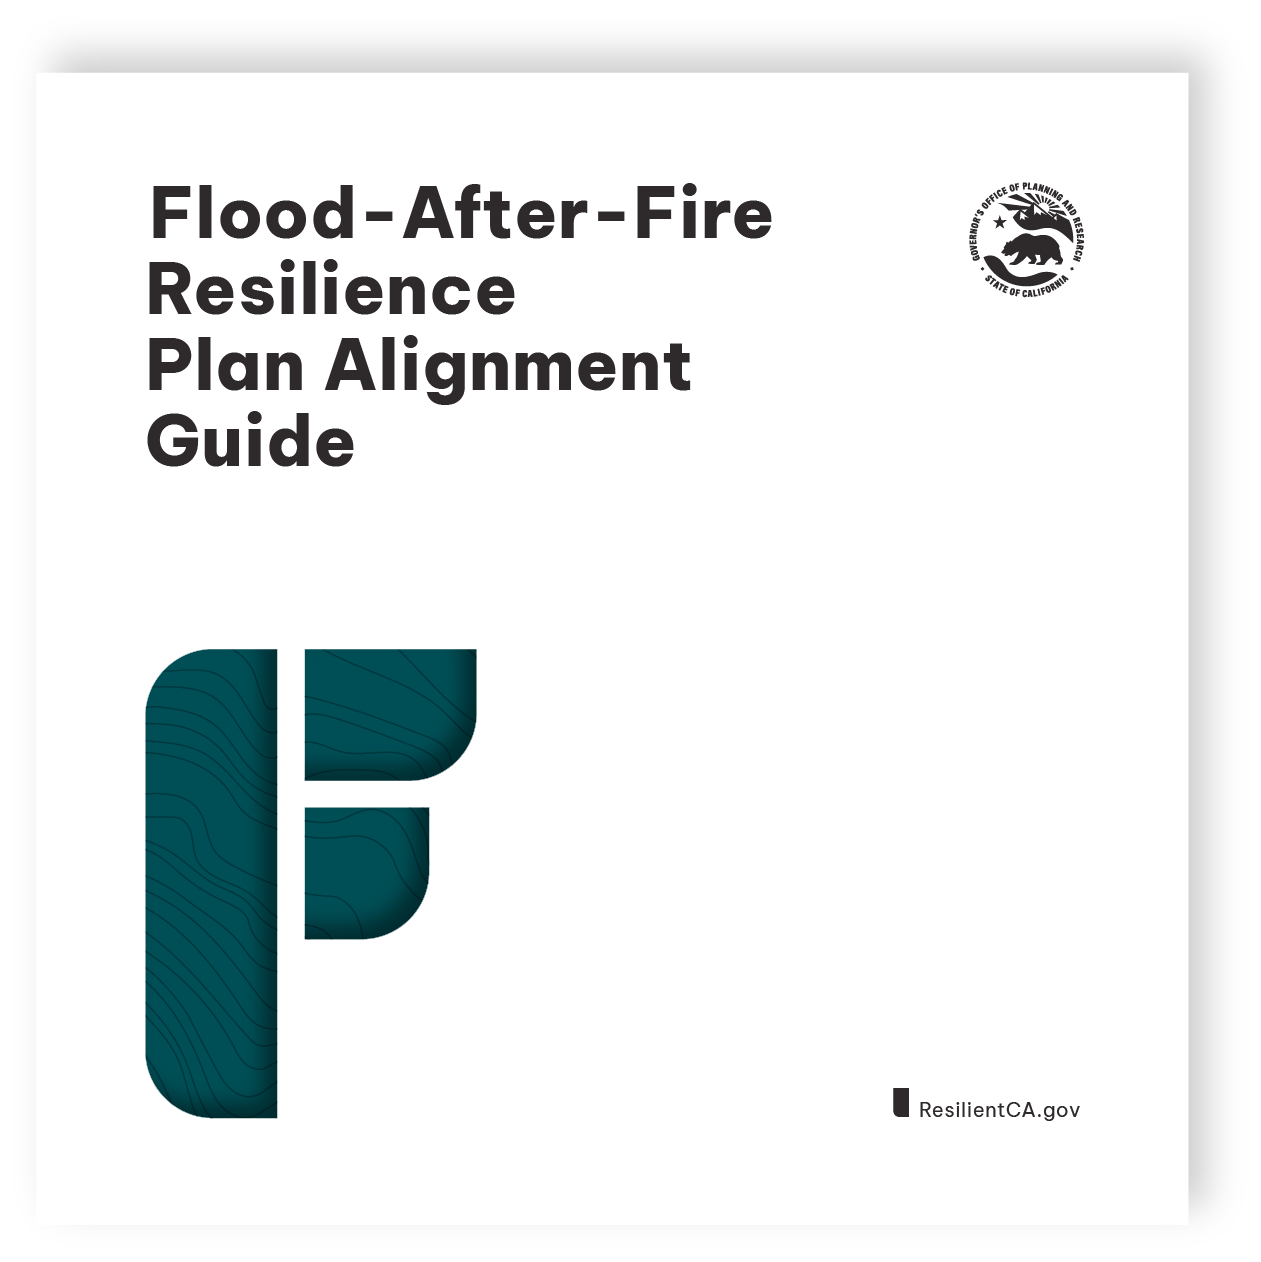 Flood-After-Fire Resilience guide report cover